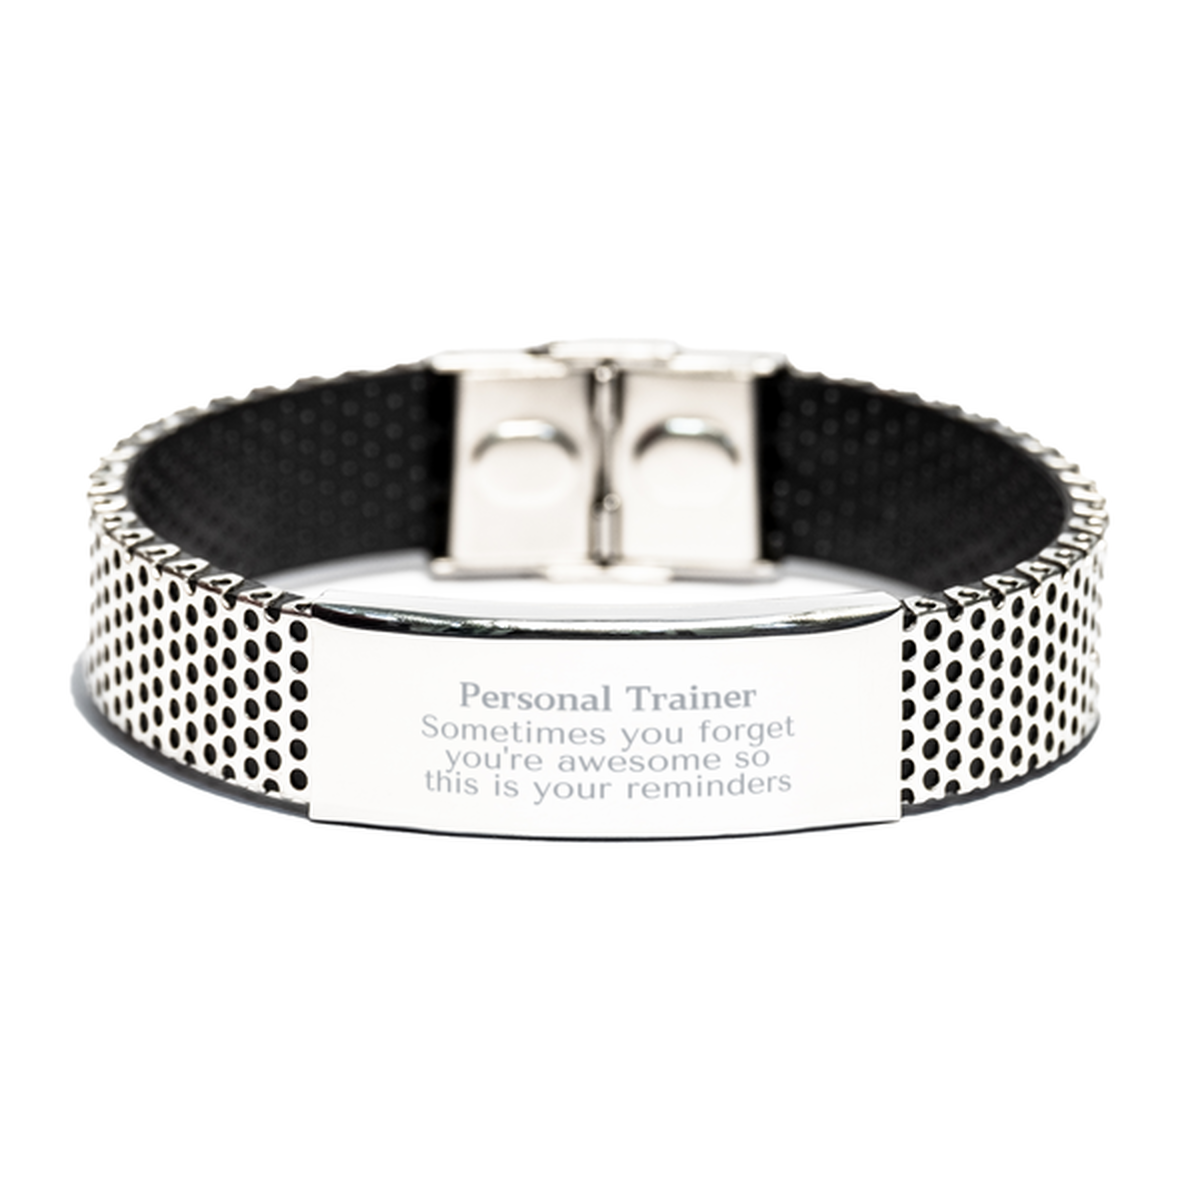 Sentimental Personal Trainer Stainless Steel Bracelet, Personal Trainer Sometimes you forget you're awesome so this is your reminders, Graduation Christmas Birthday Gifts for Personal Trainer, Men, Women, Coworkers